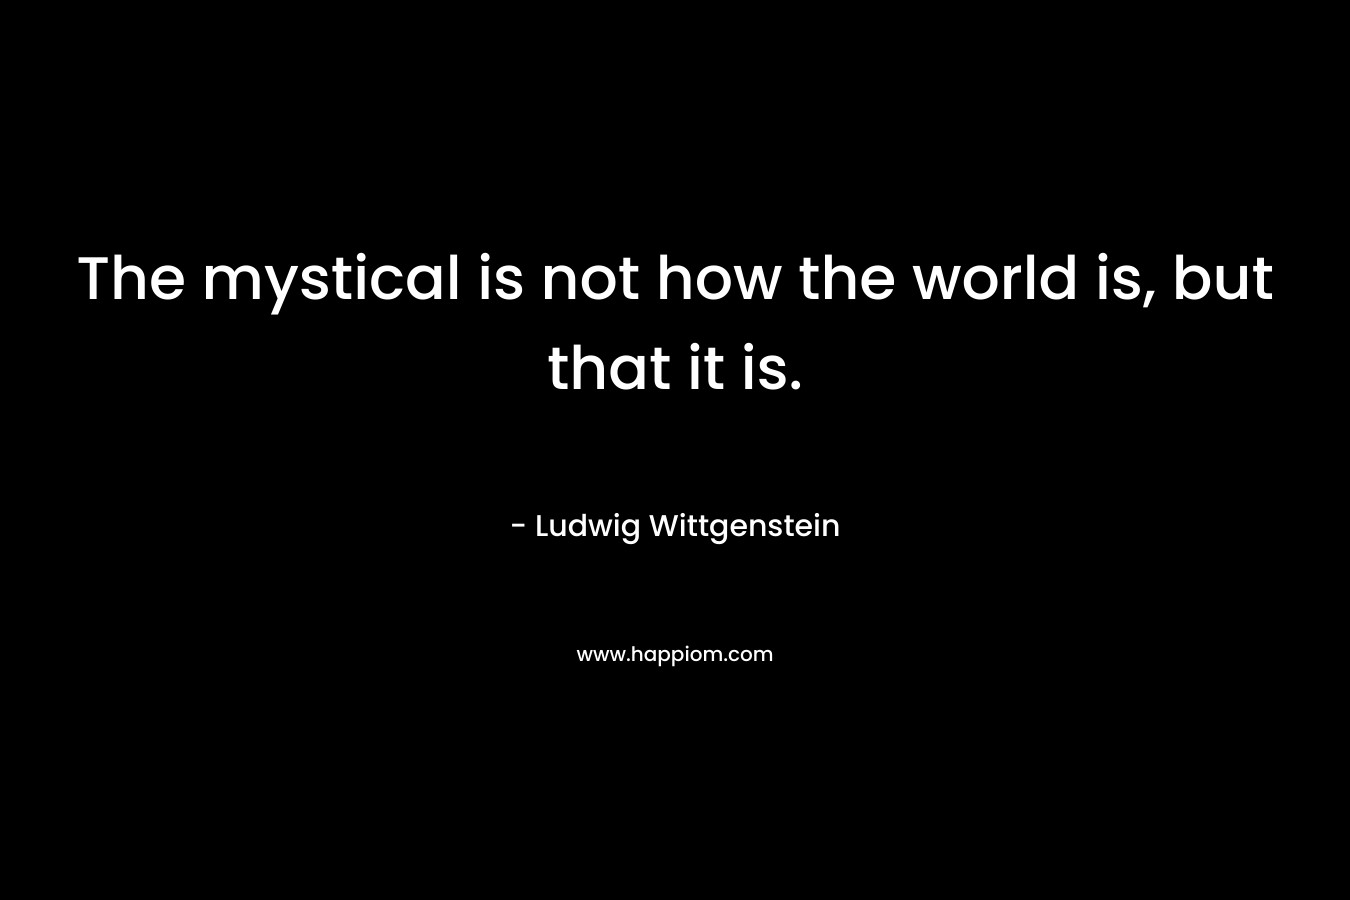 The mystical is not how the world is, but that it is.